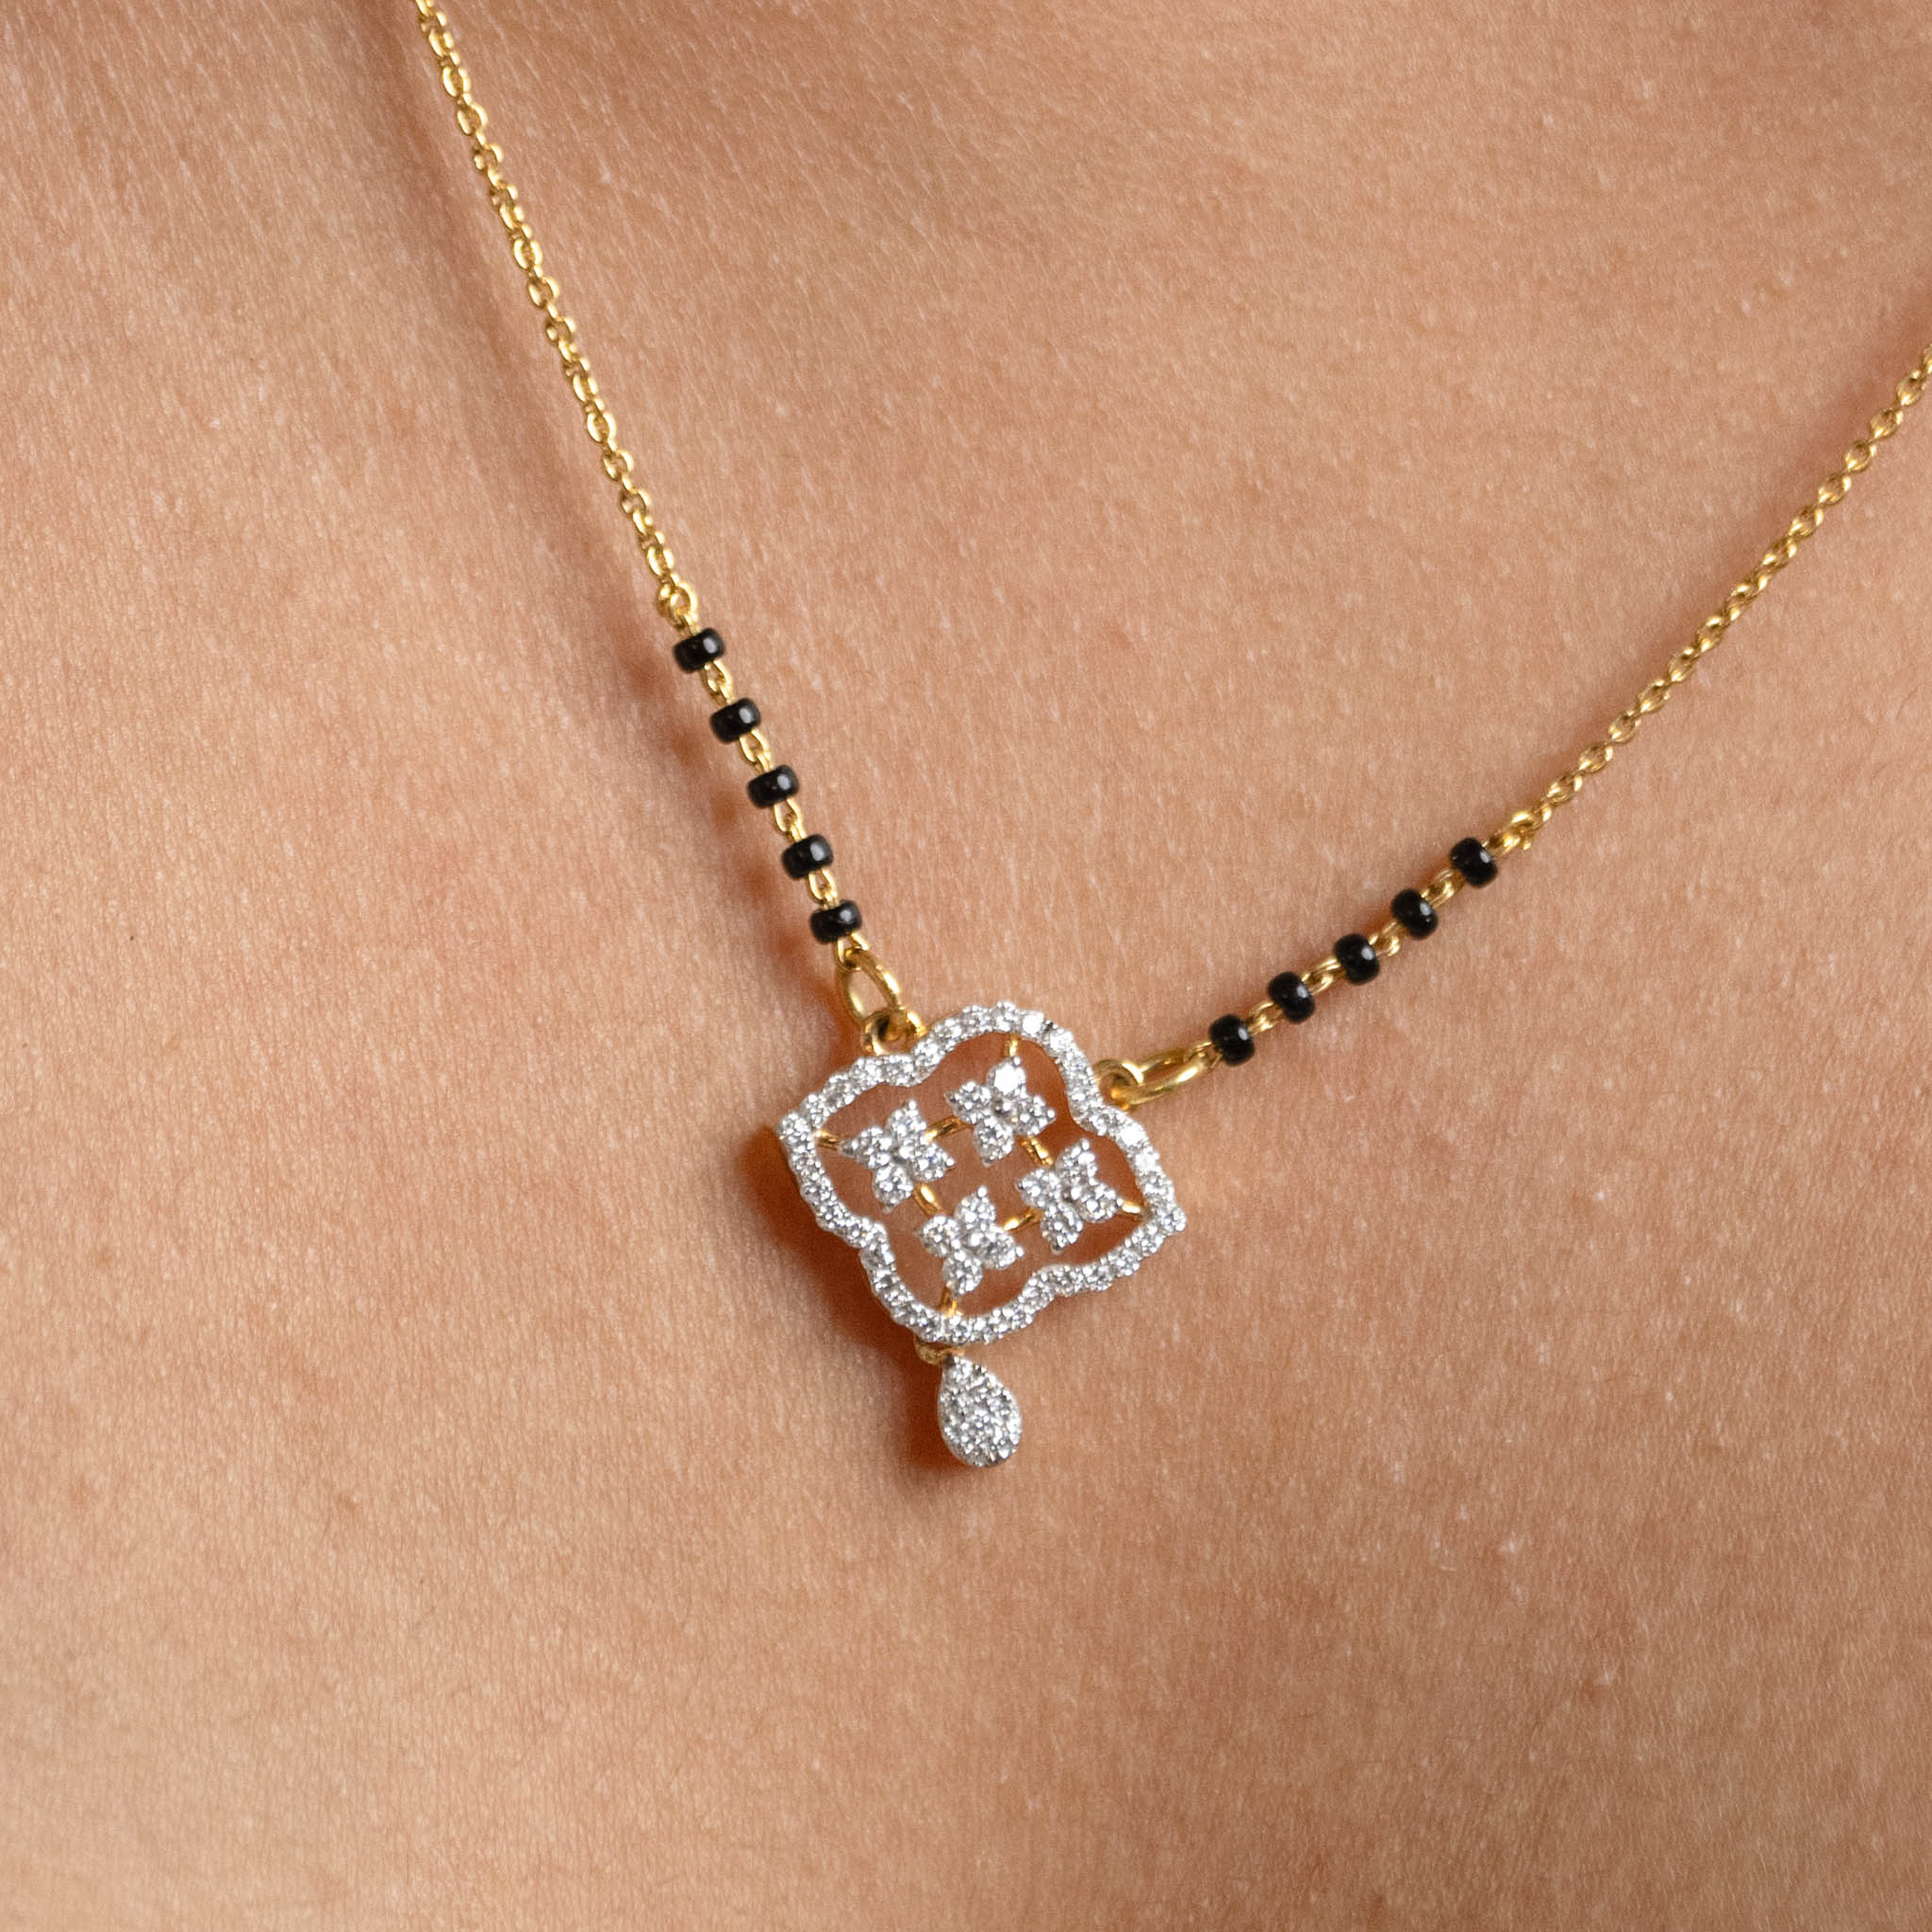 Yours 4ever - Minimal Mangalsutra